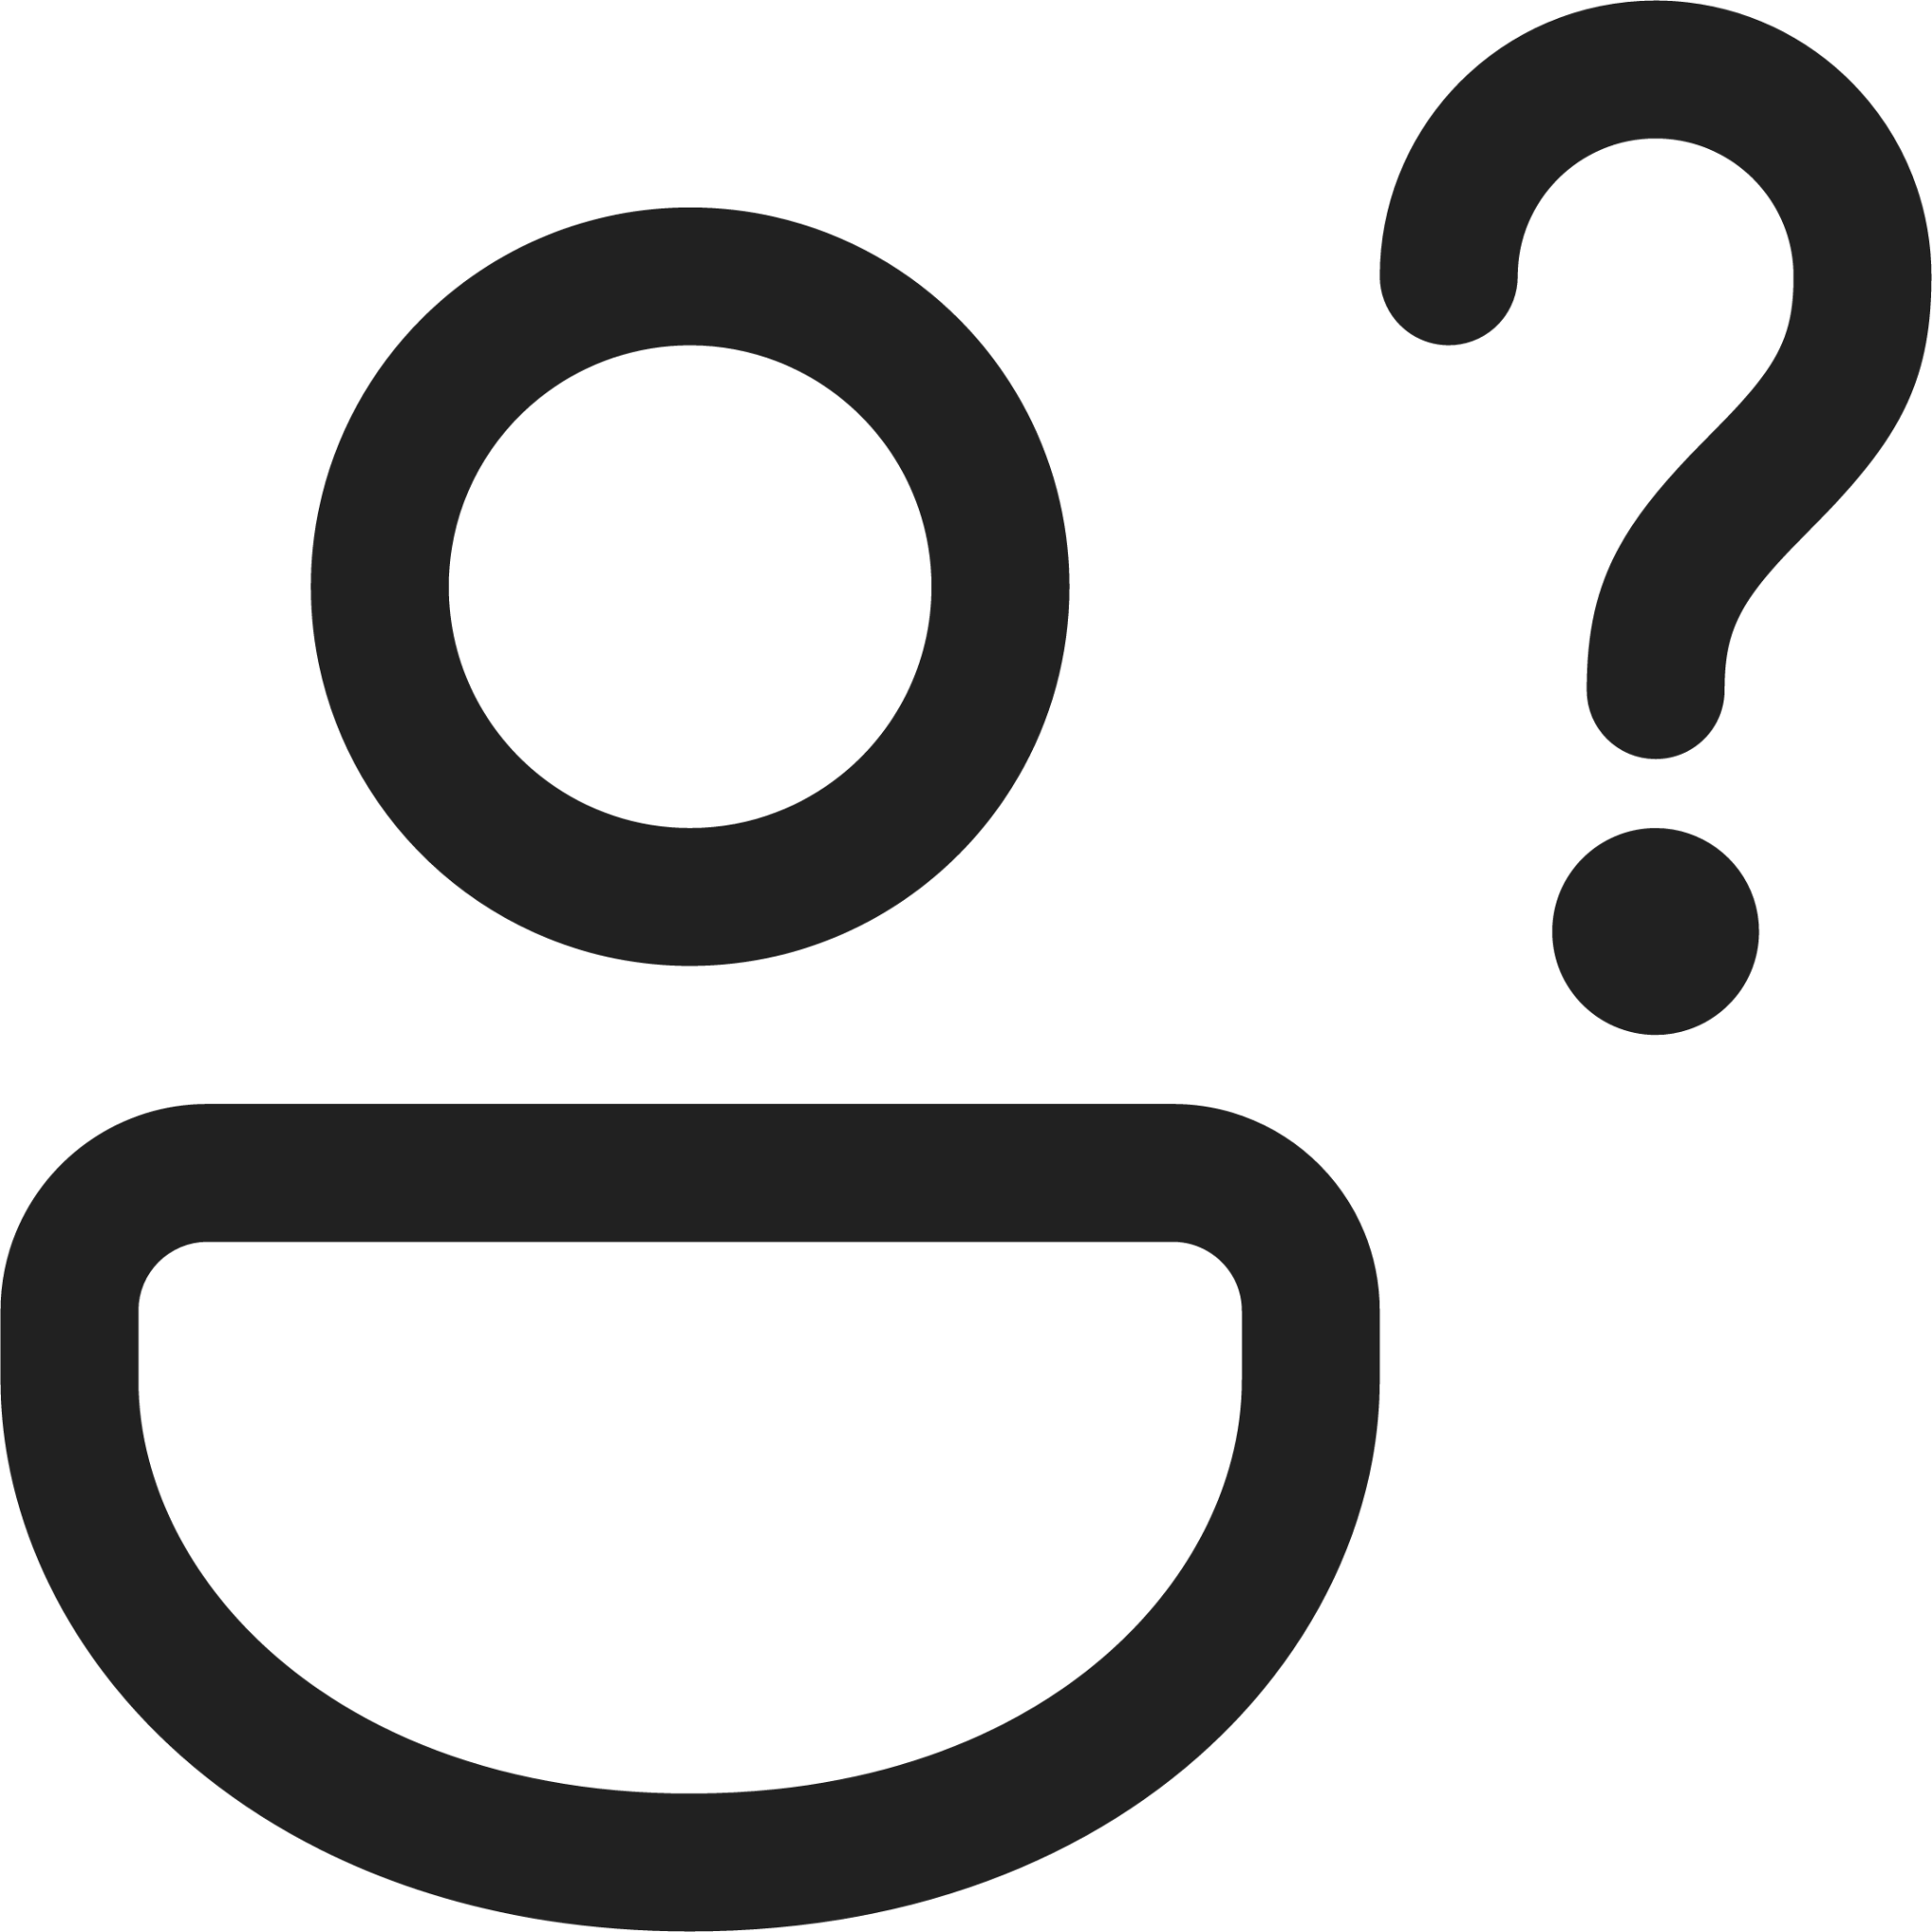 https://static-00.iconduck.com/assets.00/person-question-mark-icon-2048x2048-zqofu2hh.png